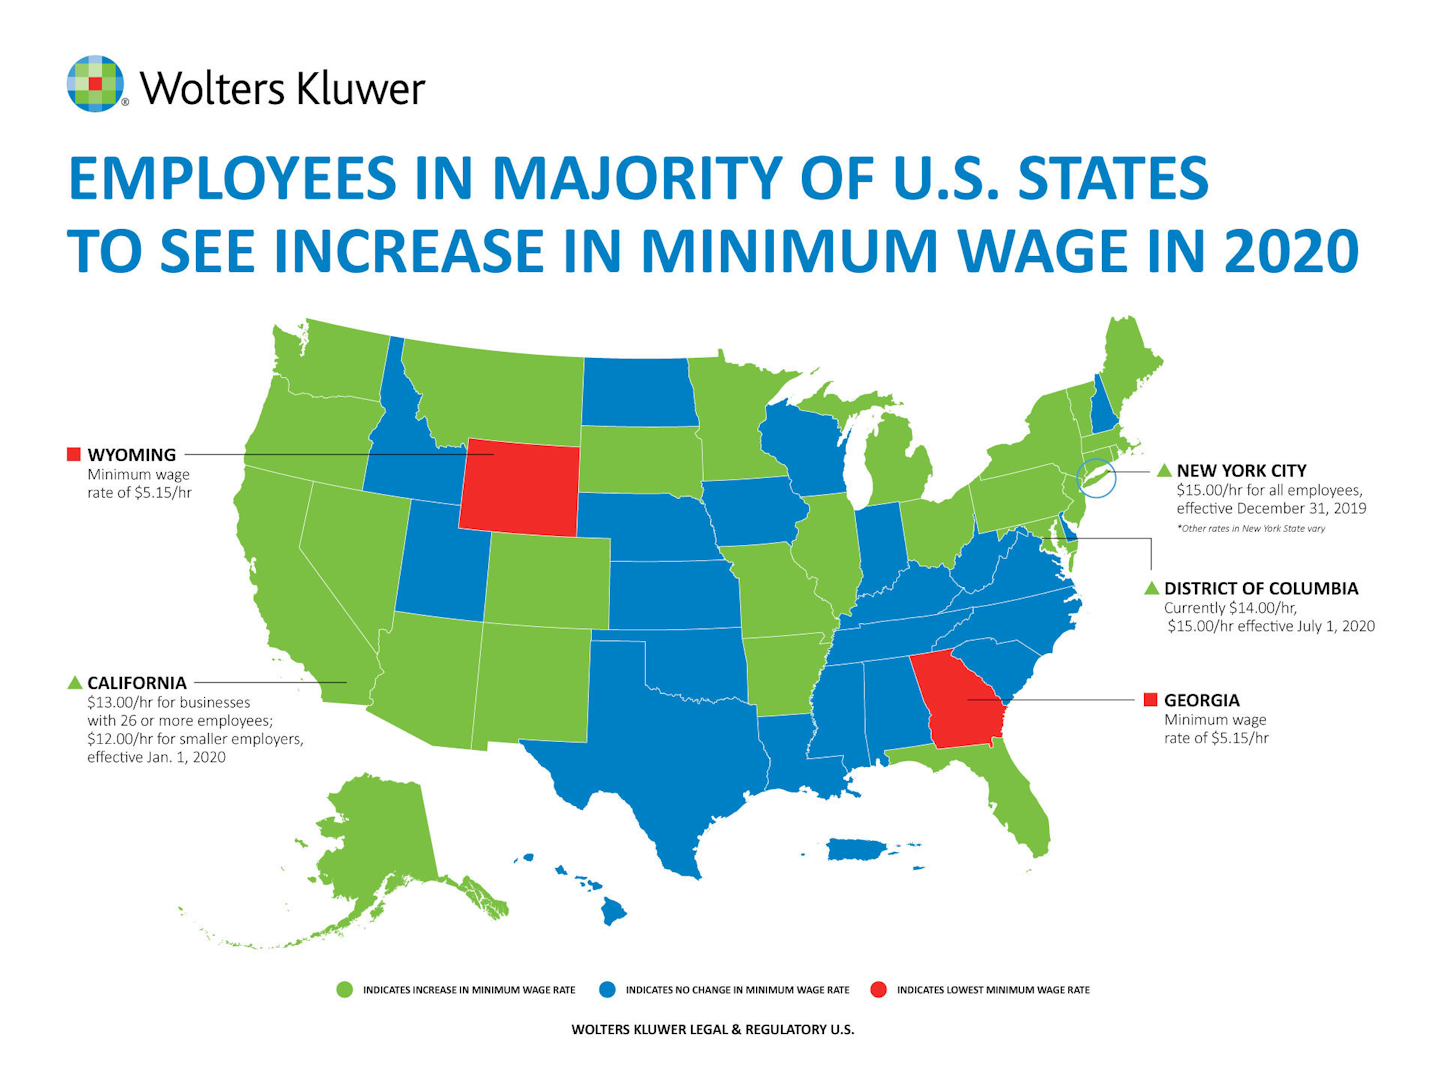 Workers In Majority Of U.S. States To See An Increase In Minimum Wage